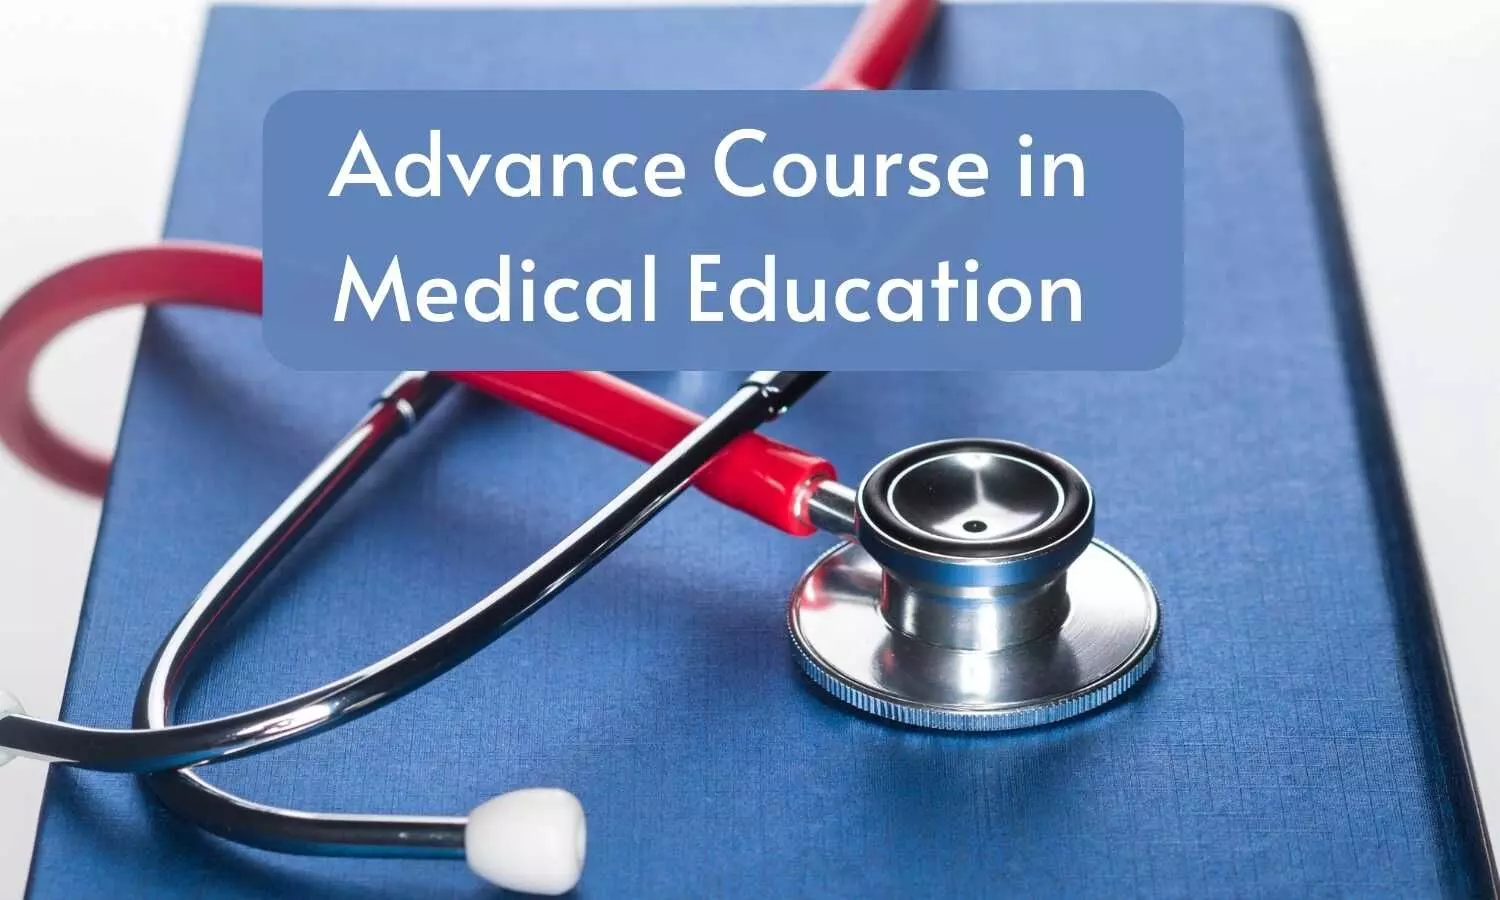 Fresh enrolments for Advance Course in Medical Education (ACME) Program put on hold: NMC